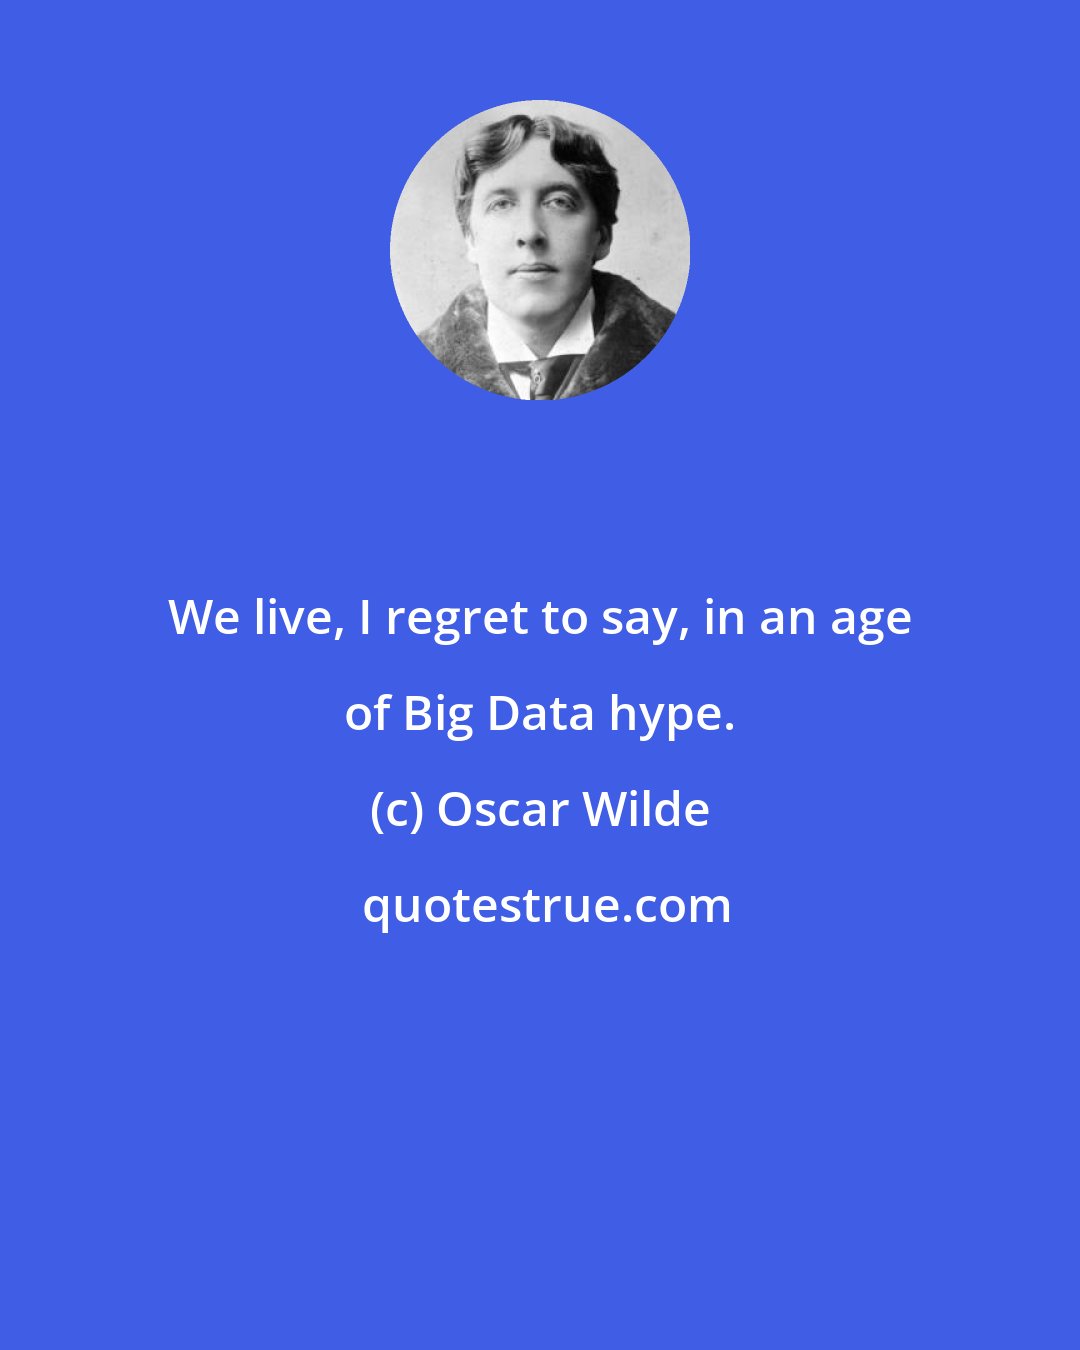 Oscar Wilde: We live, I regret to say, in an age of Big Data hype.